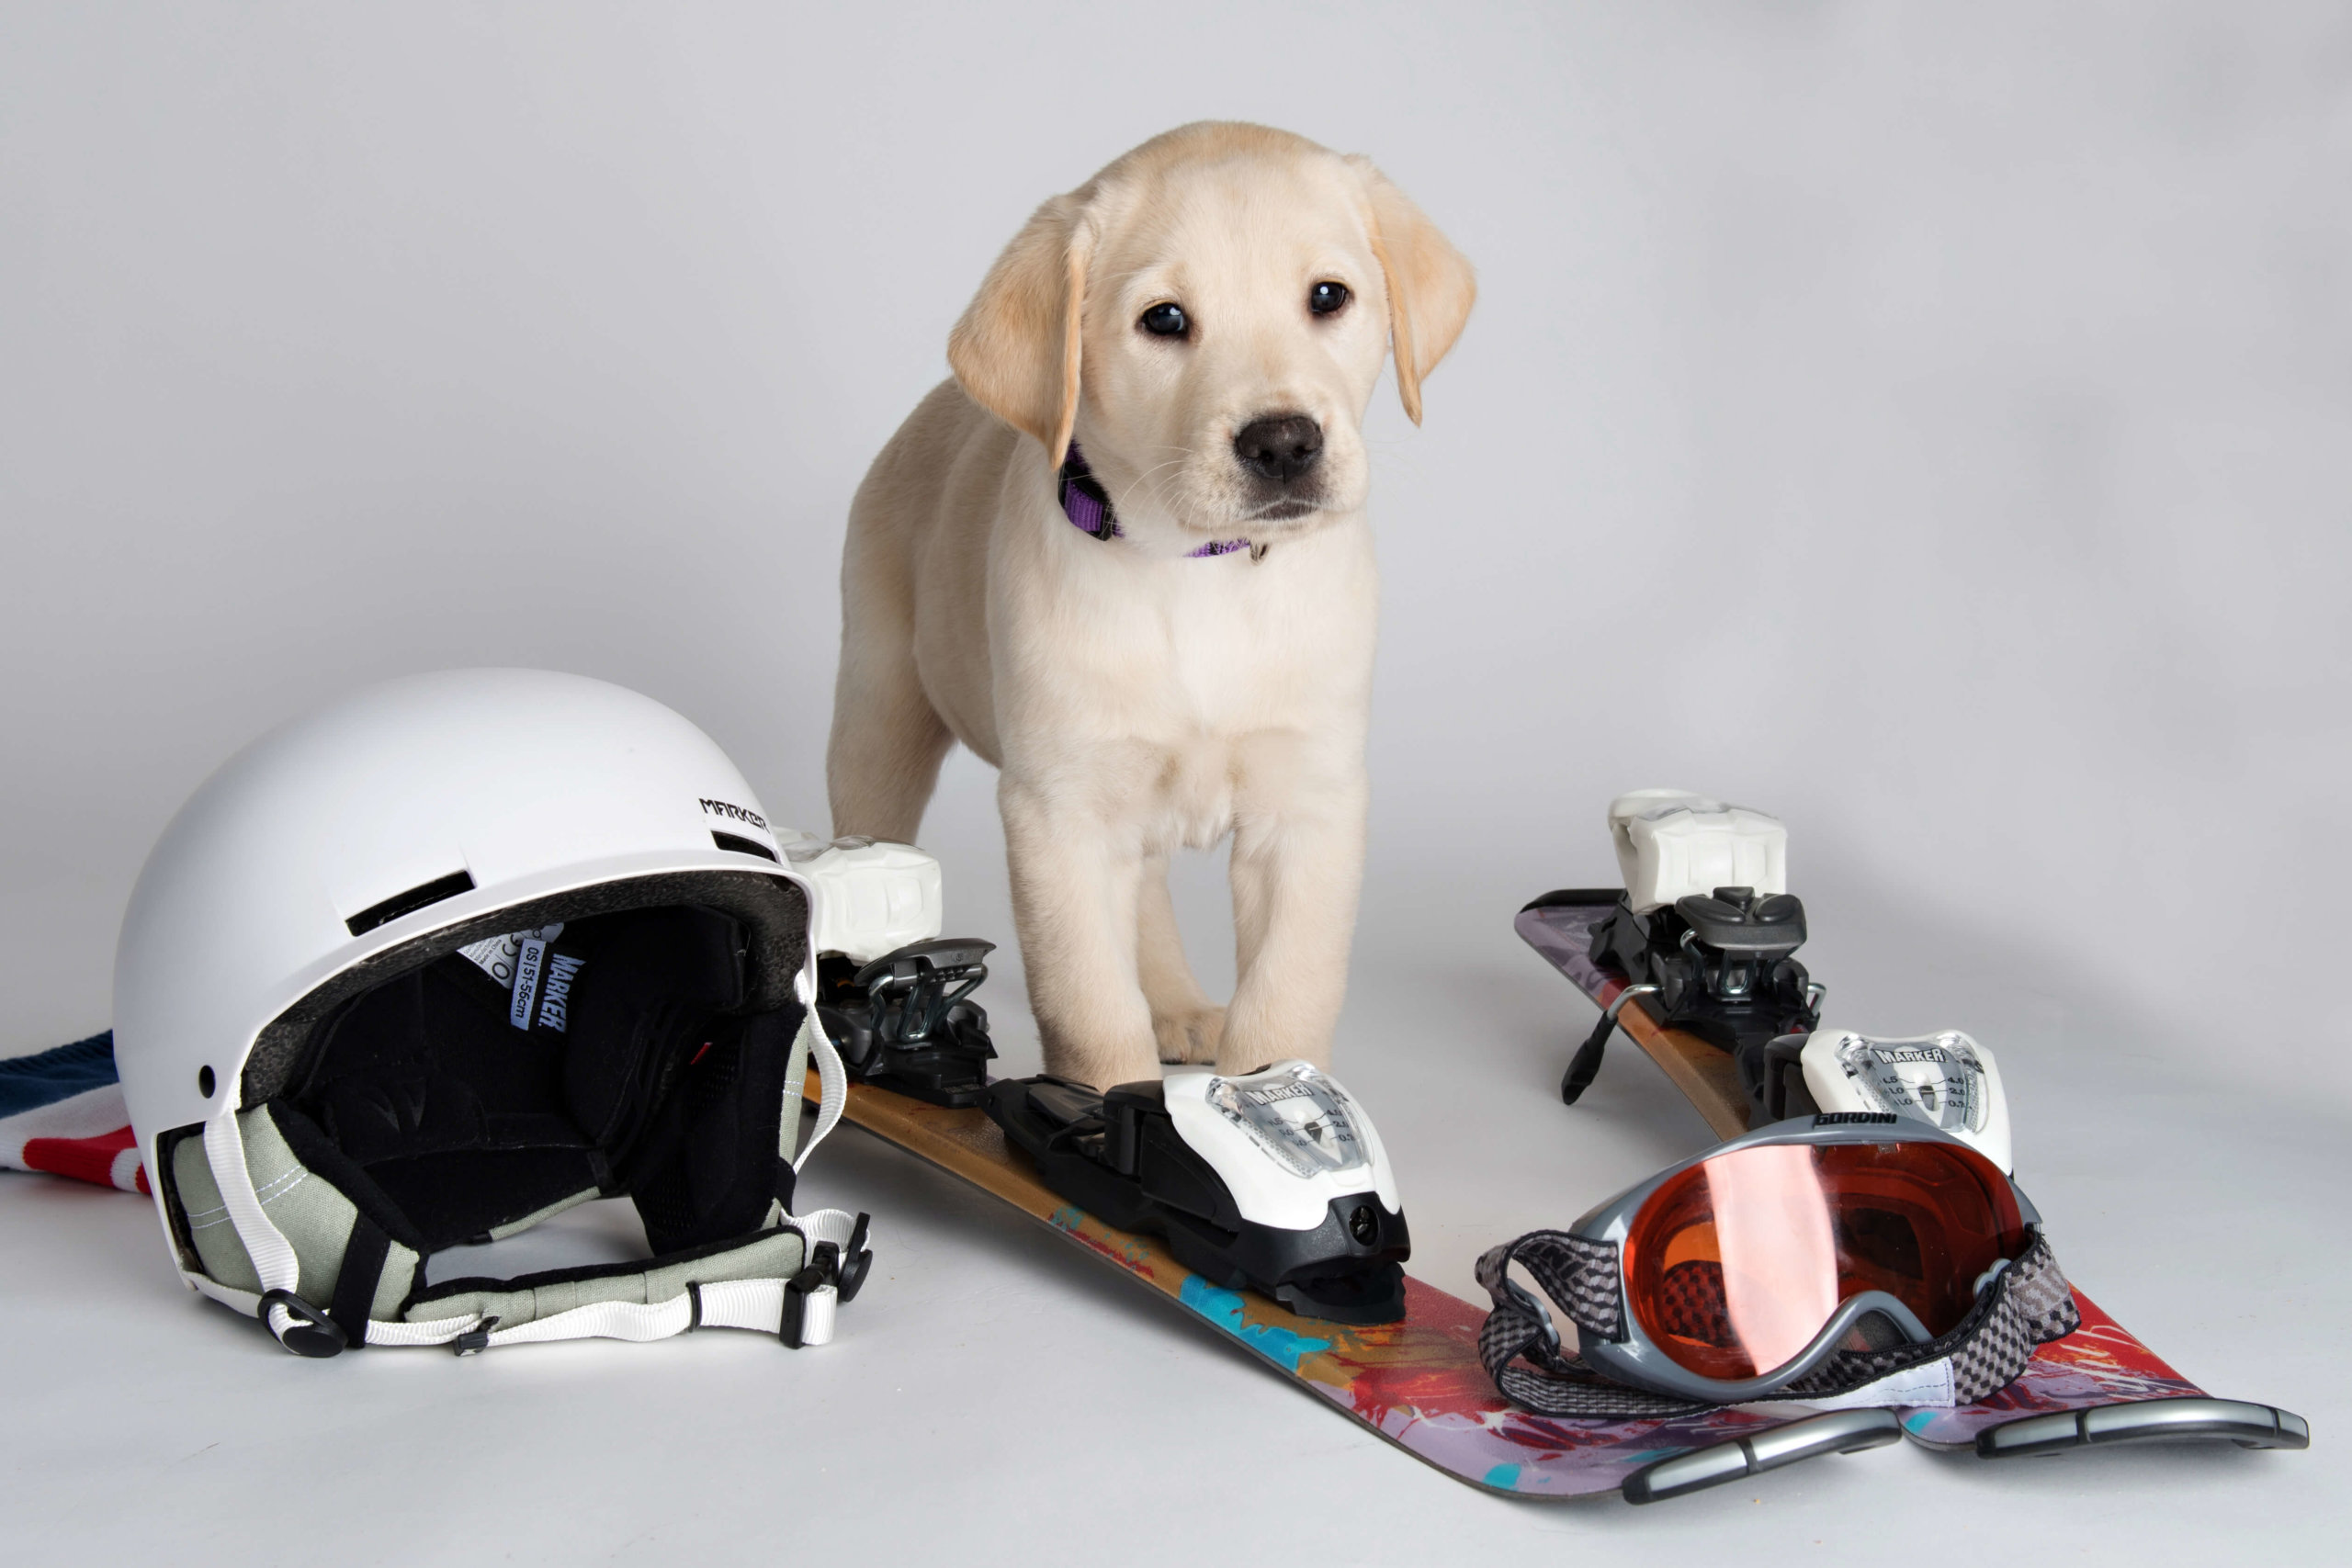 Mikaela prepares her equipment to hit the slopes.